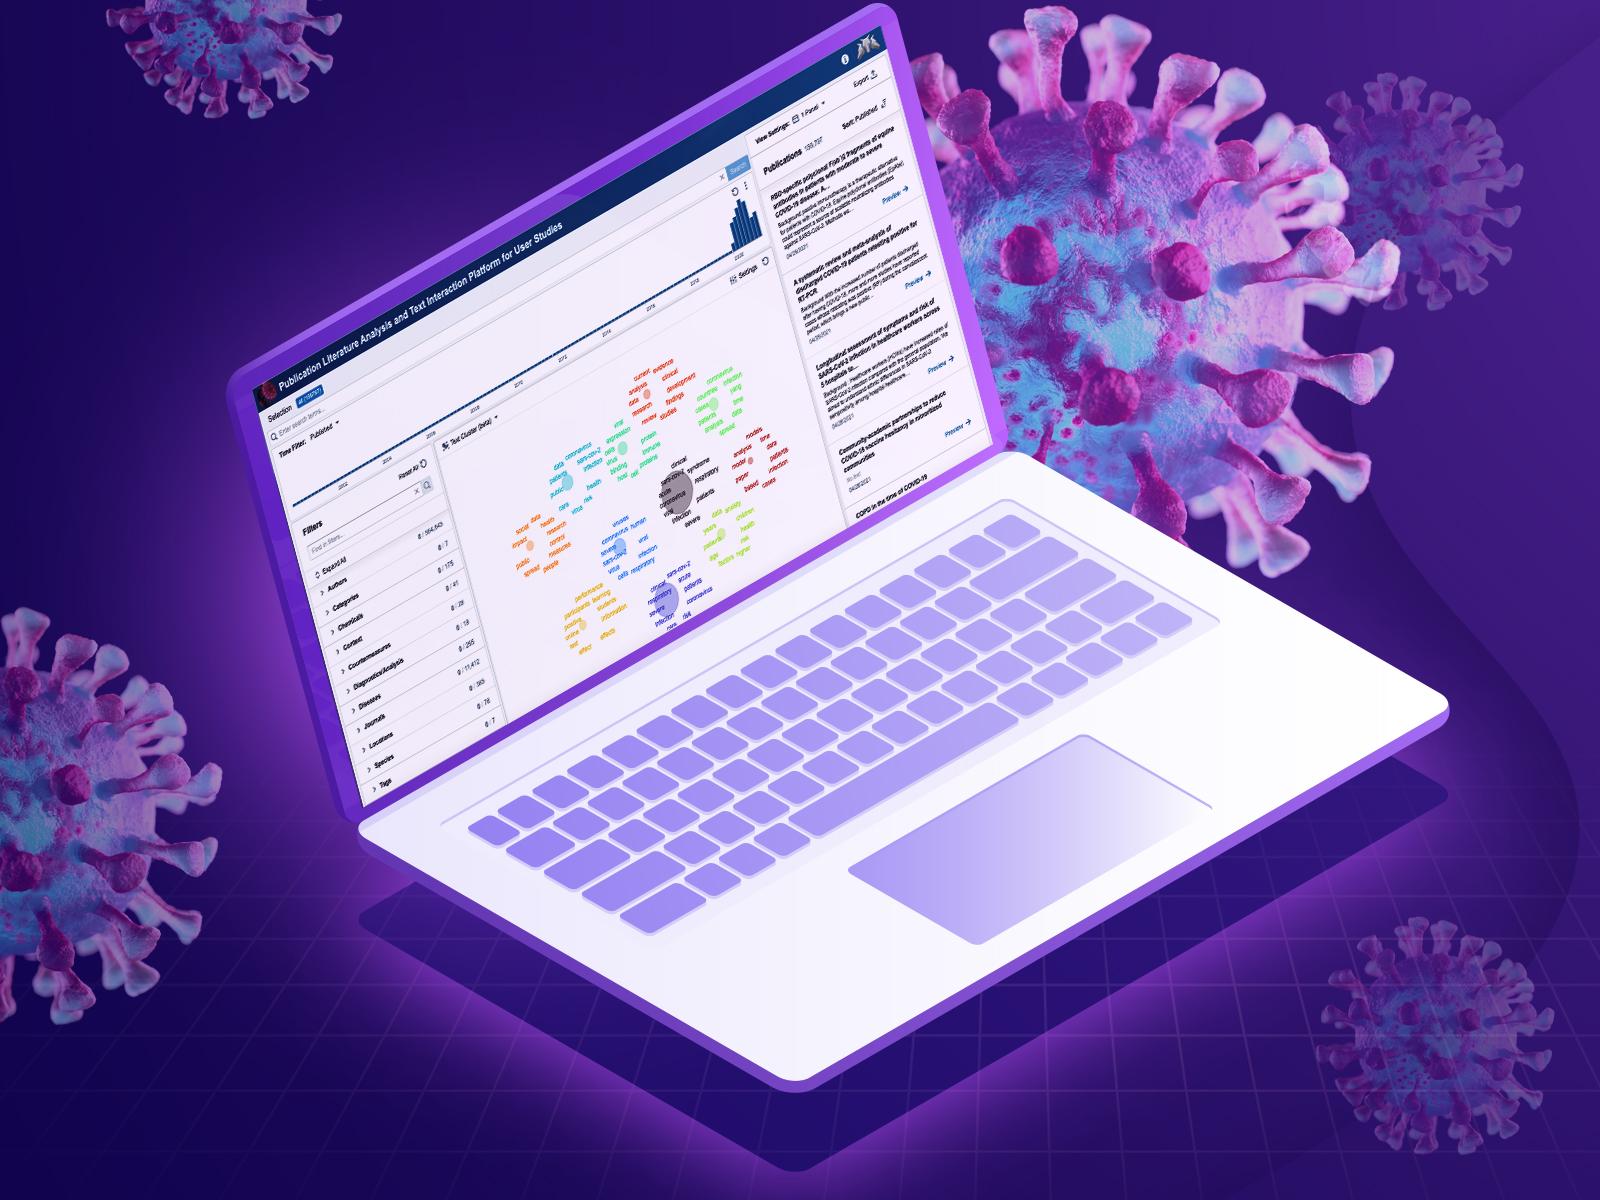 a laptop illustration on a purple background with coronavirus particles